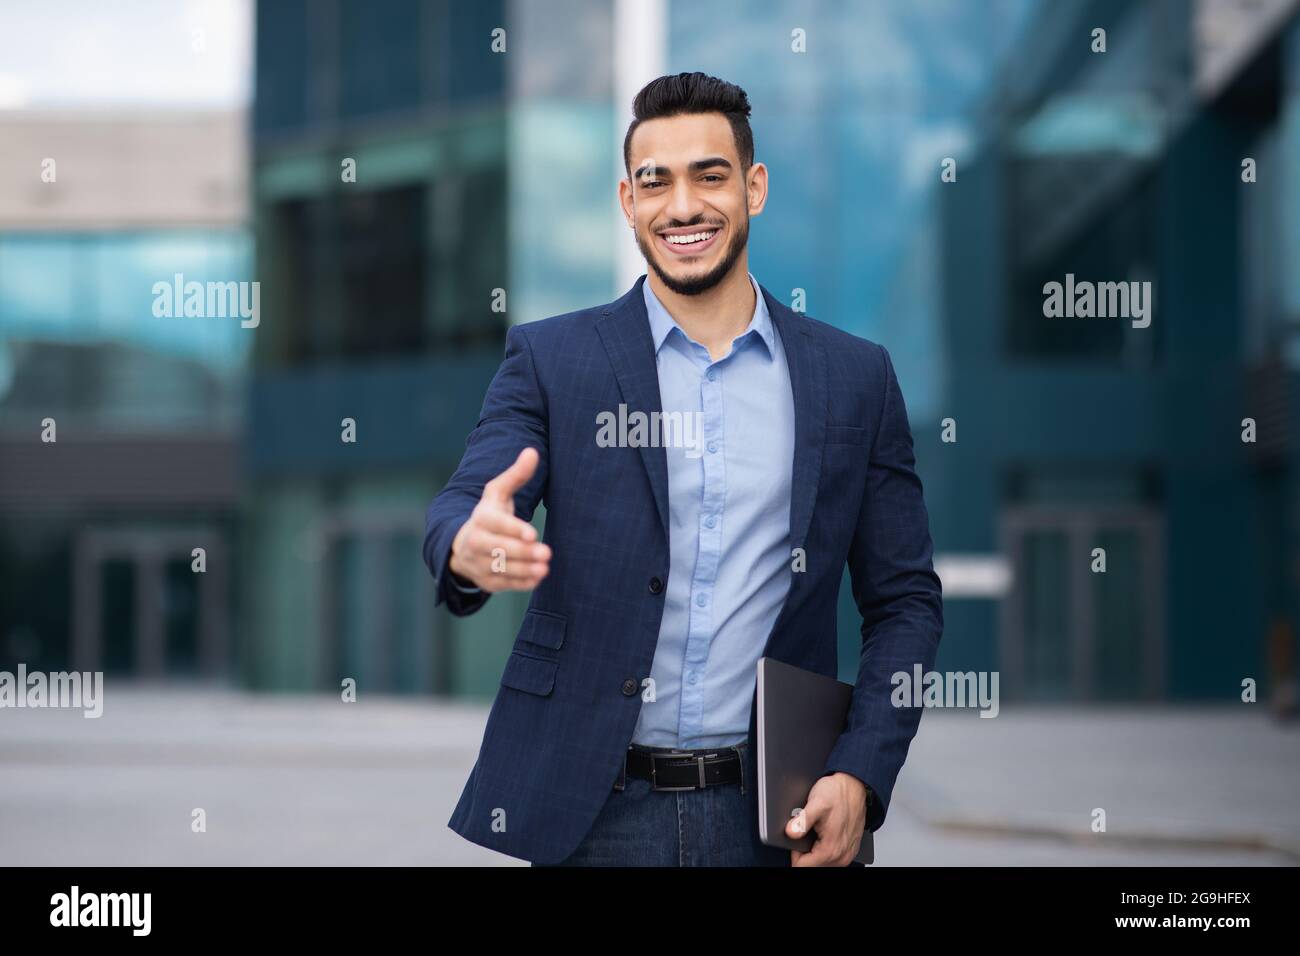 https://c8.alamy.com/comp/2G9HFEX/positive-millennial-arab-man-in-formal-stylish-suit-outstretching-hand-towards-camera-and-smiling-greeting-business-partner-next-to-office-building-2G9HFEX.jpg